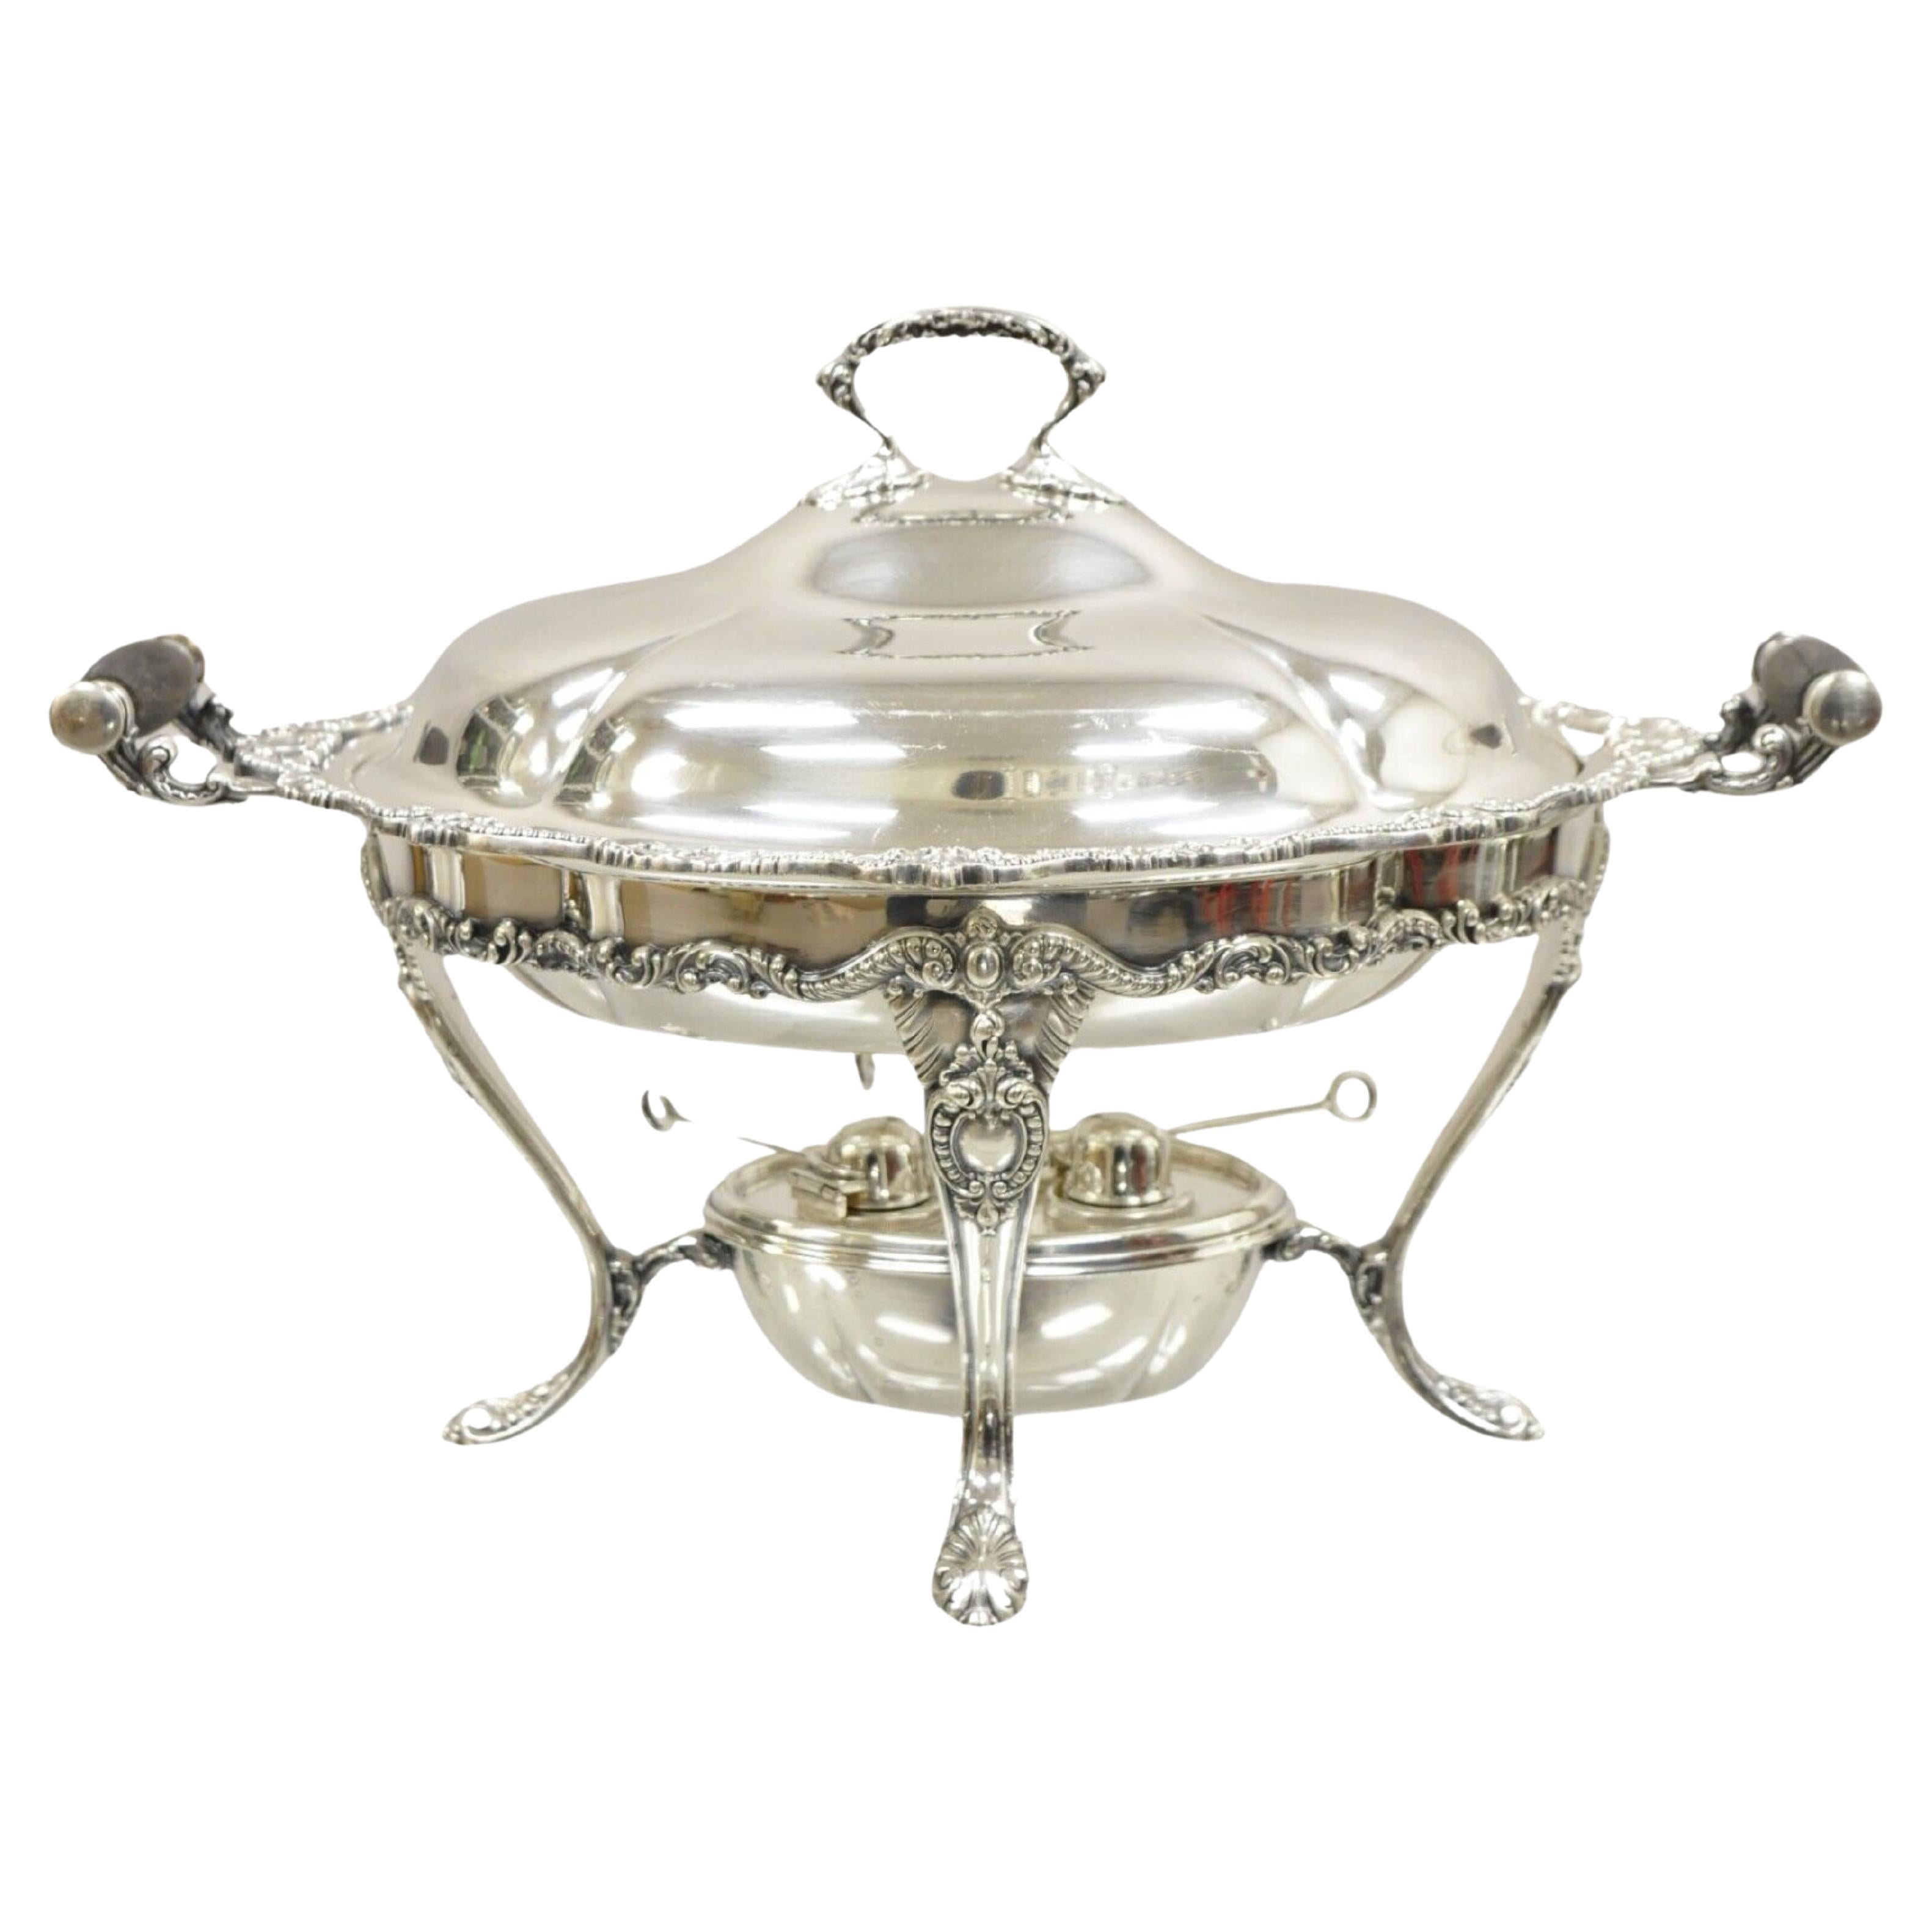 Reed & Barton Victorian Silver Plated Triple Burner Warming Serving Chafing Dish